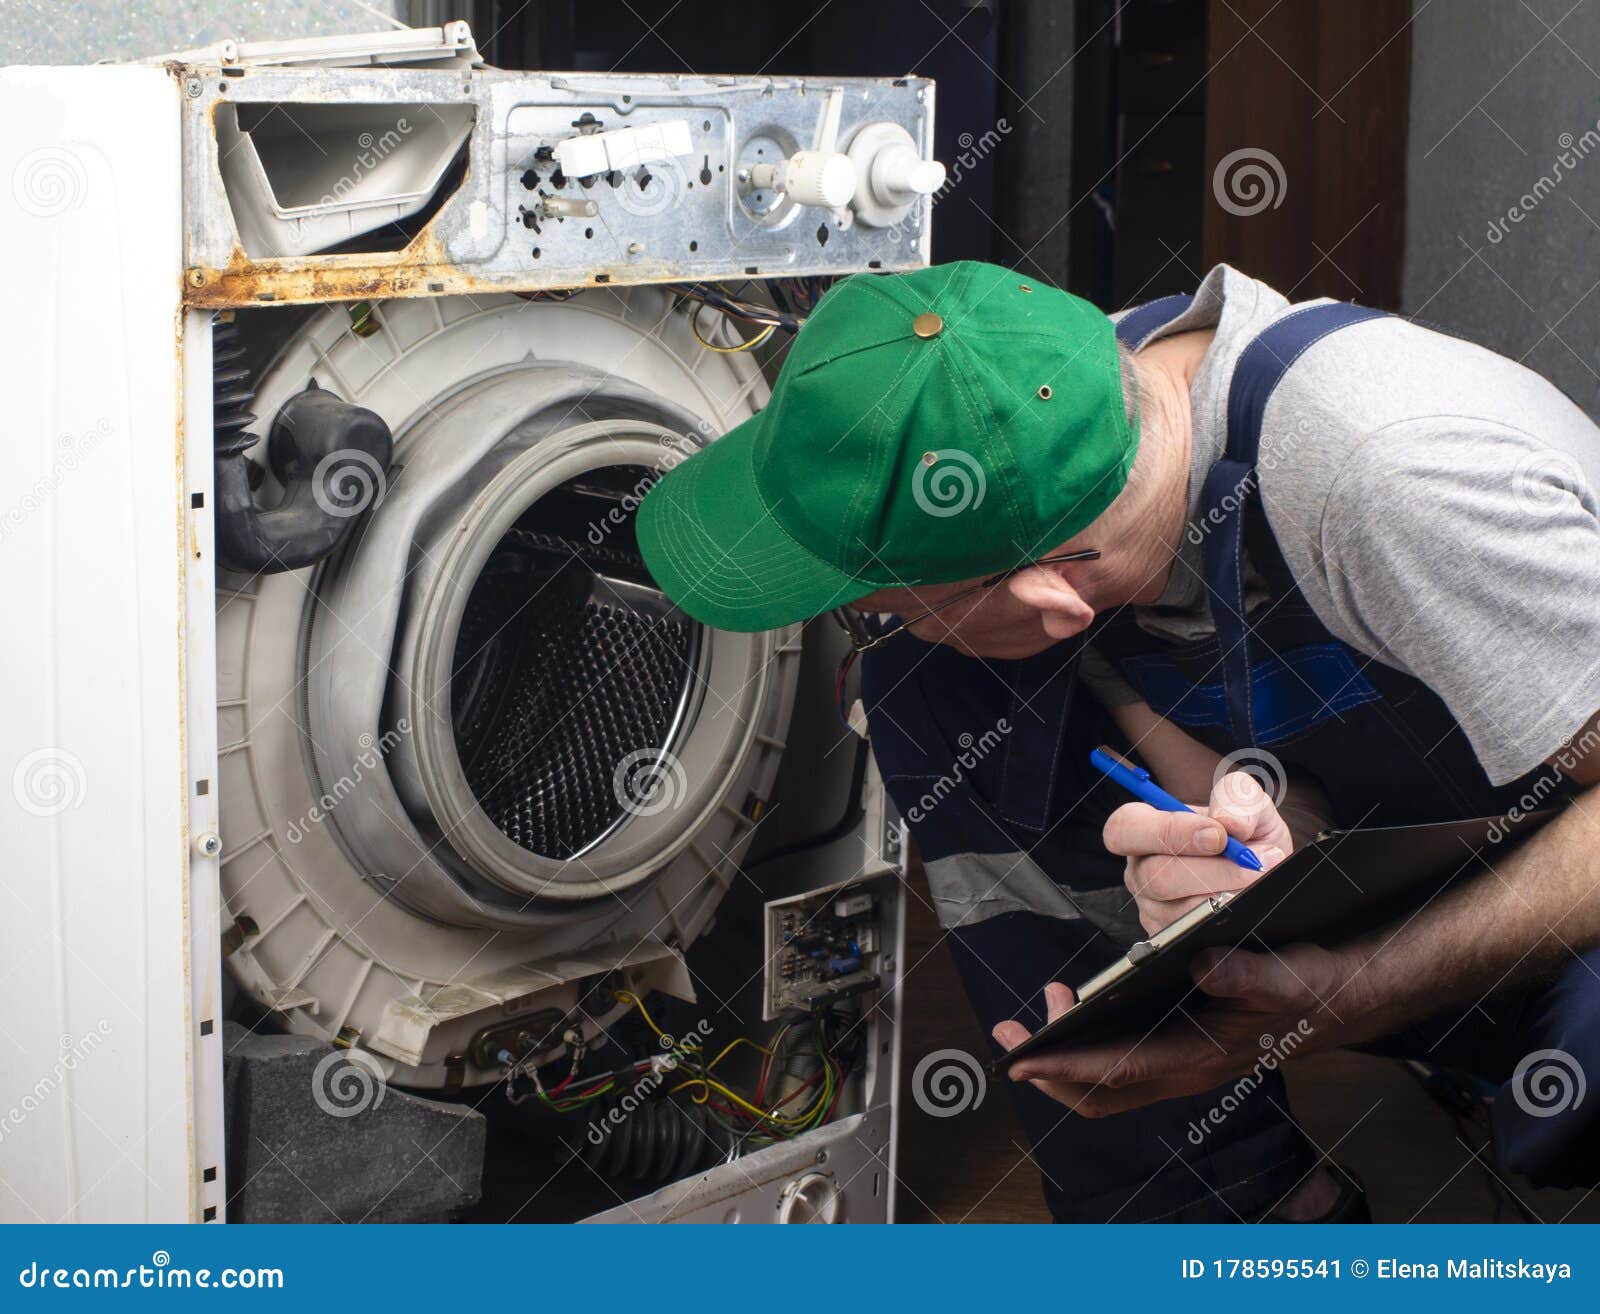 Washer Repair: Complete Guide to Knowing What's Wrong with the Washer